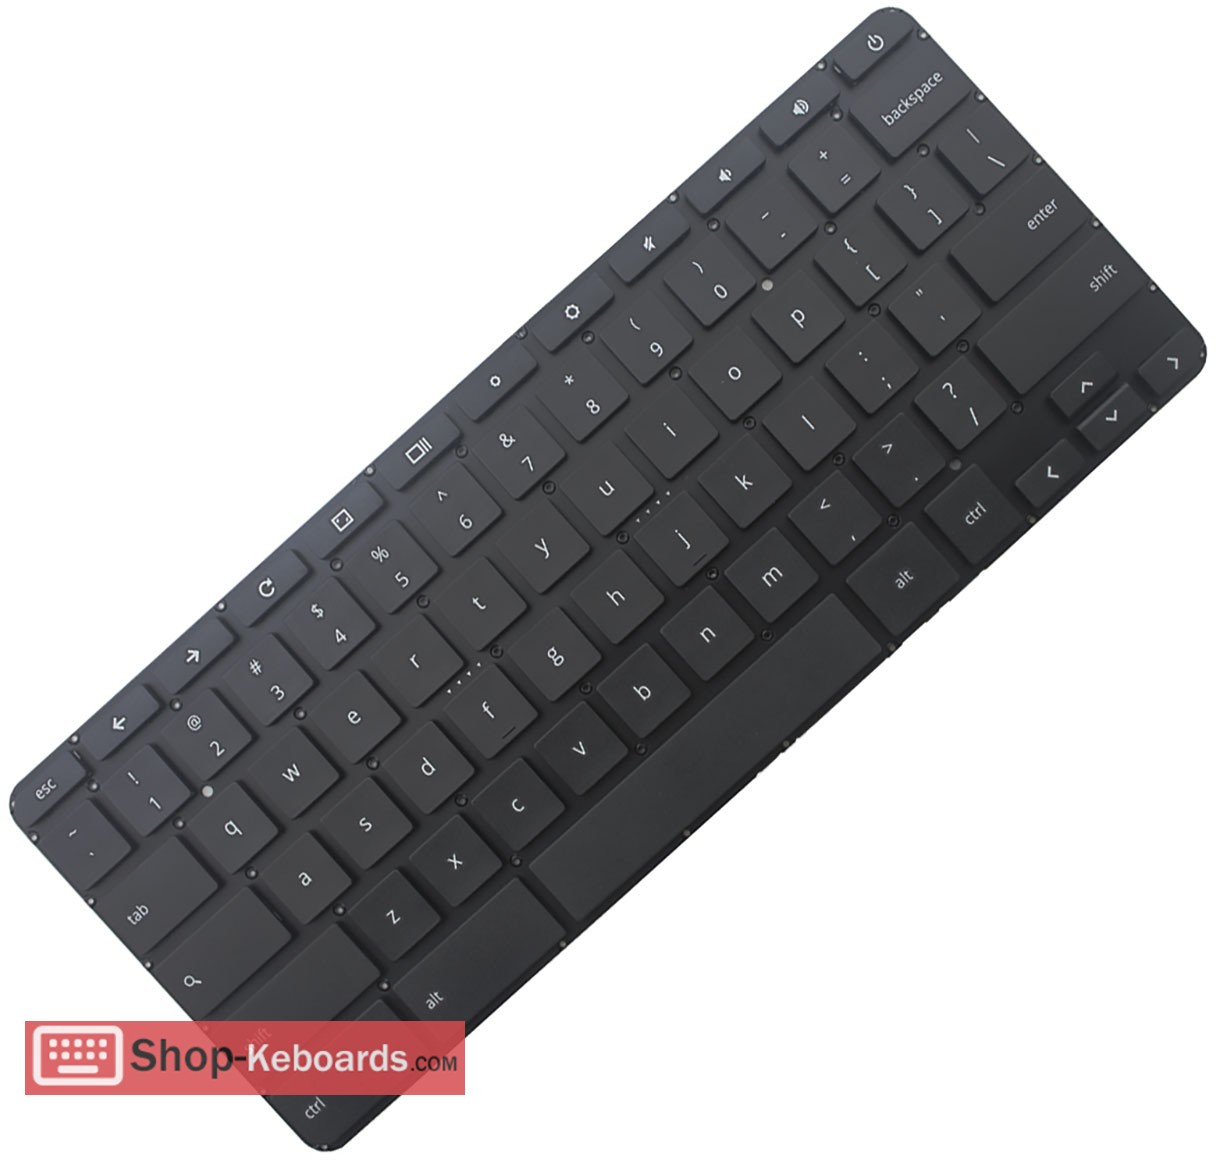 HP Chromebook 11 G2 Keyboard replacement